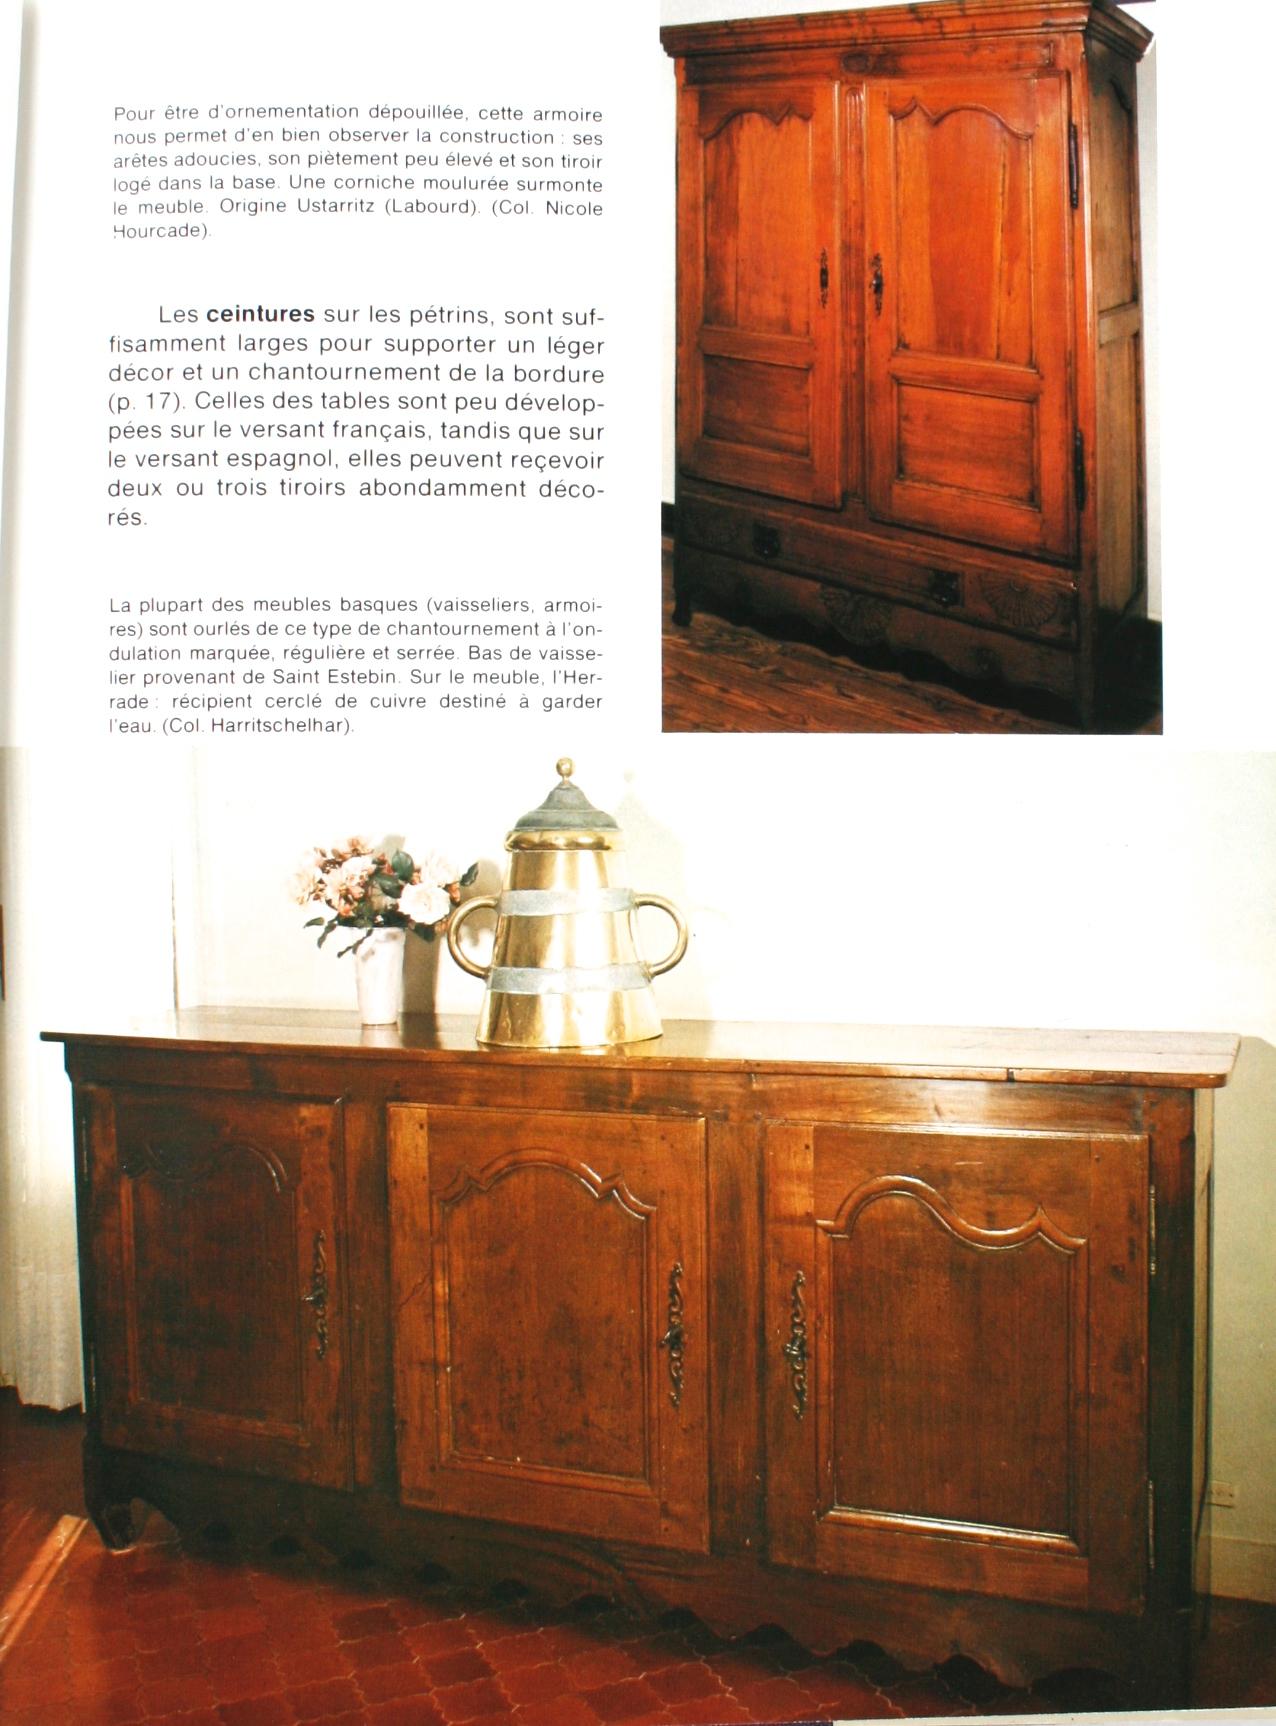 Late 20th Century Mobilier Basque by Lucile Oliver, 1st Ed